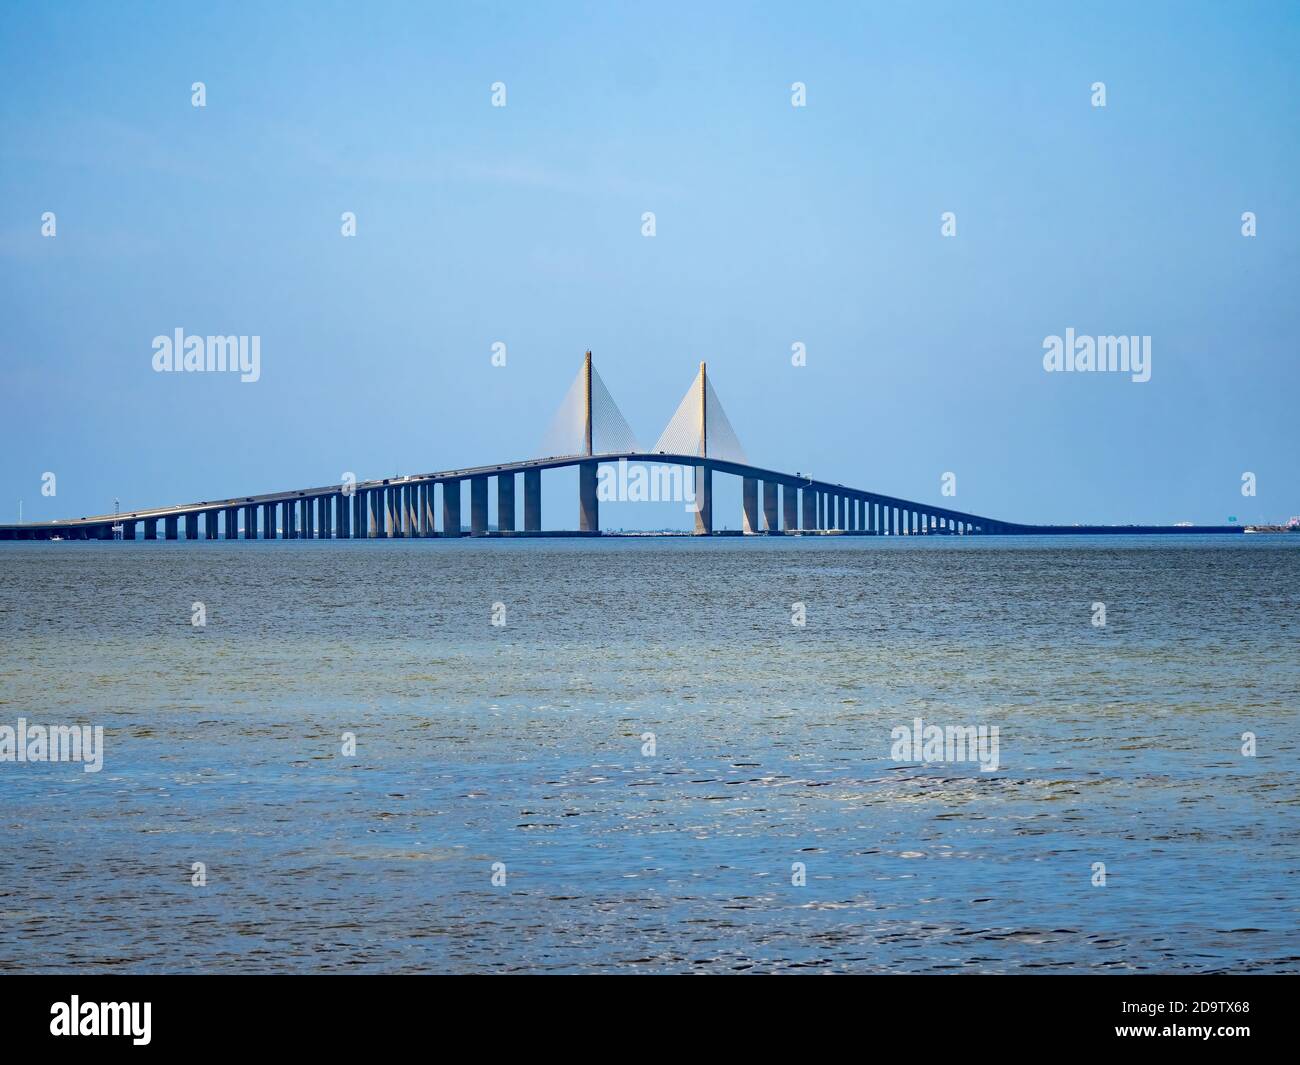 The  Bob Graham Sunshine Skyway Bridge spanning the Lower Tampa Bay connecting St. Petersburg, Florida to Terra Ceia Florida in the United States Stock Photo